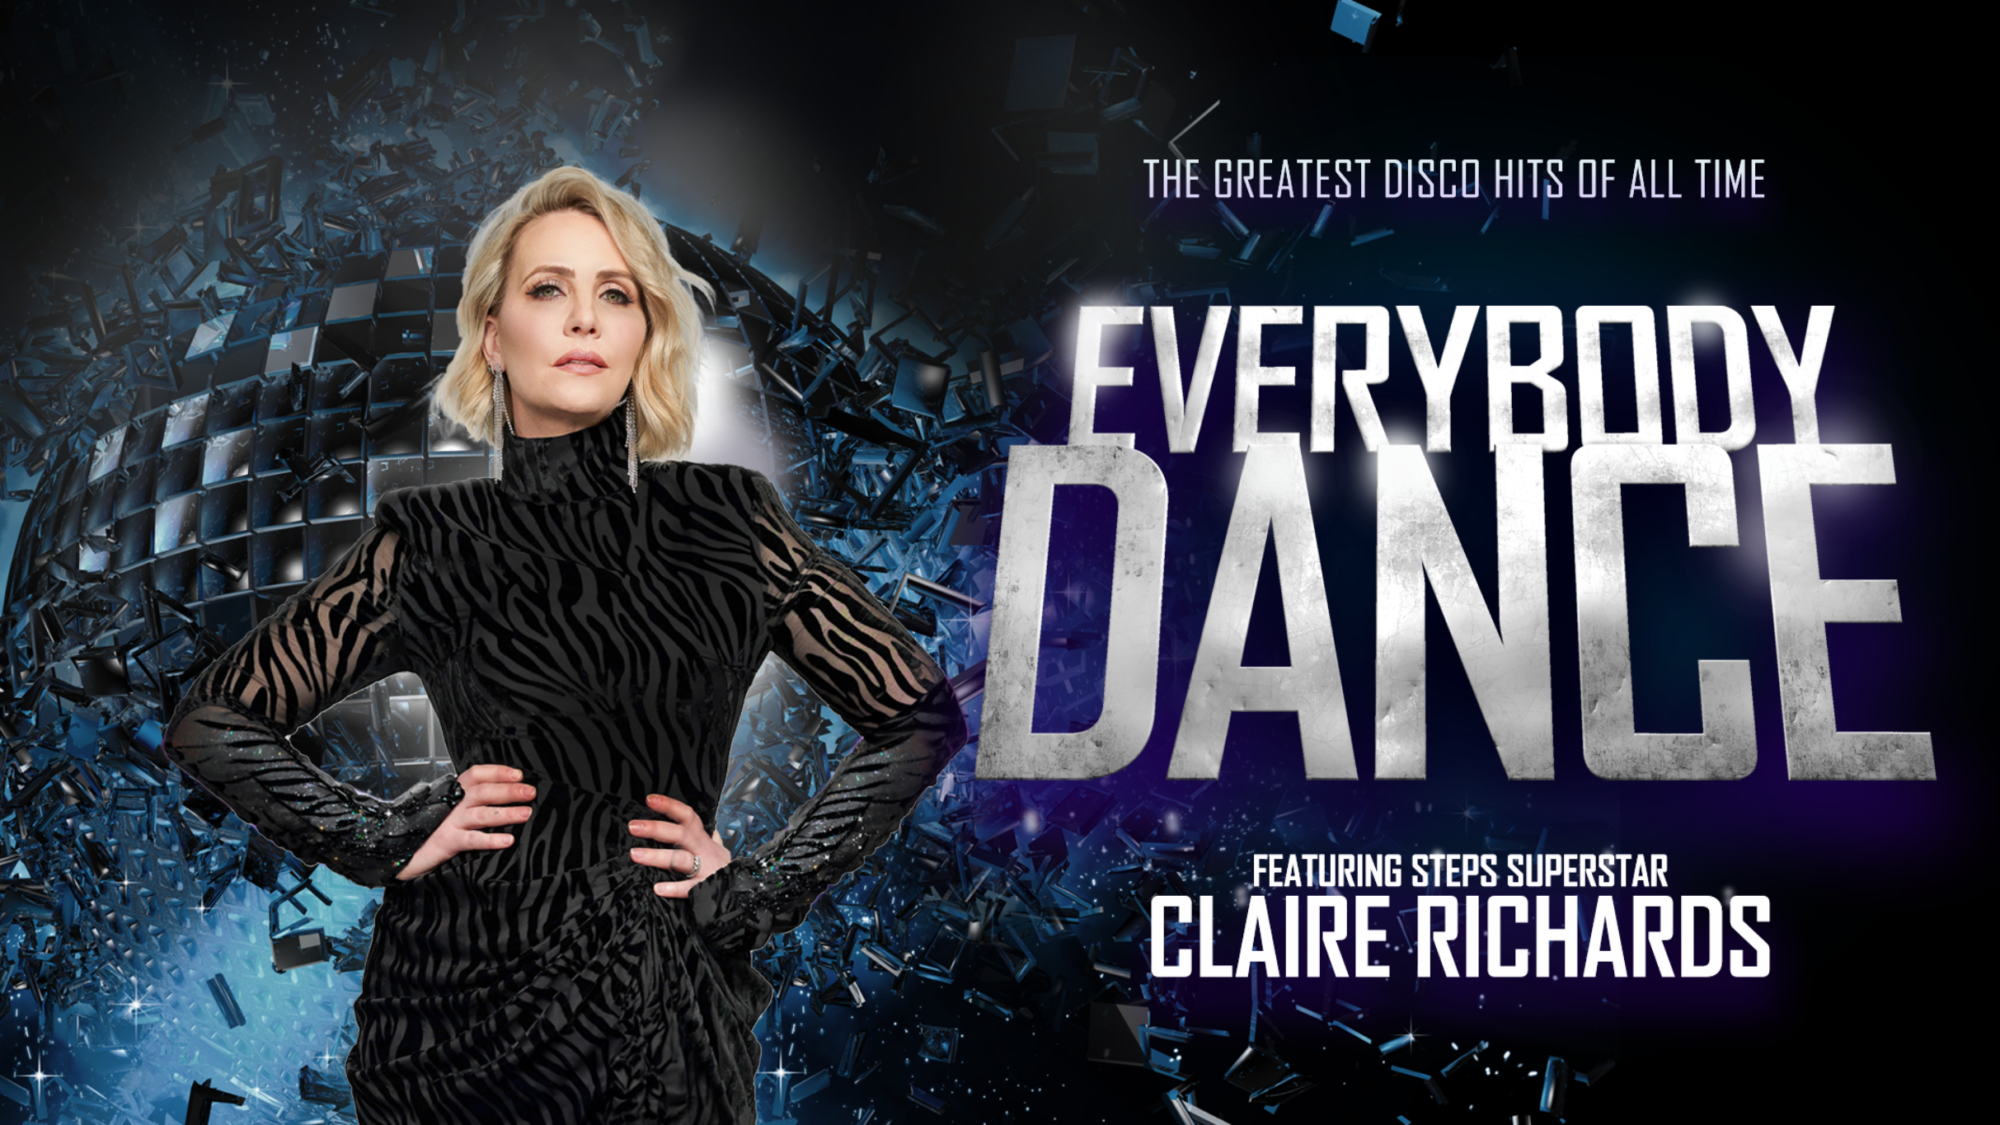 Image name Everybody Dance with Claire Richards at Hull City Hall Hull the 29 image from the post Events in Yorkshire.com.